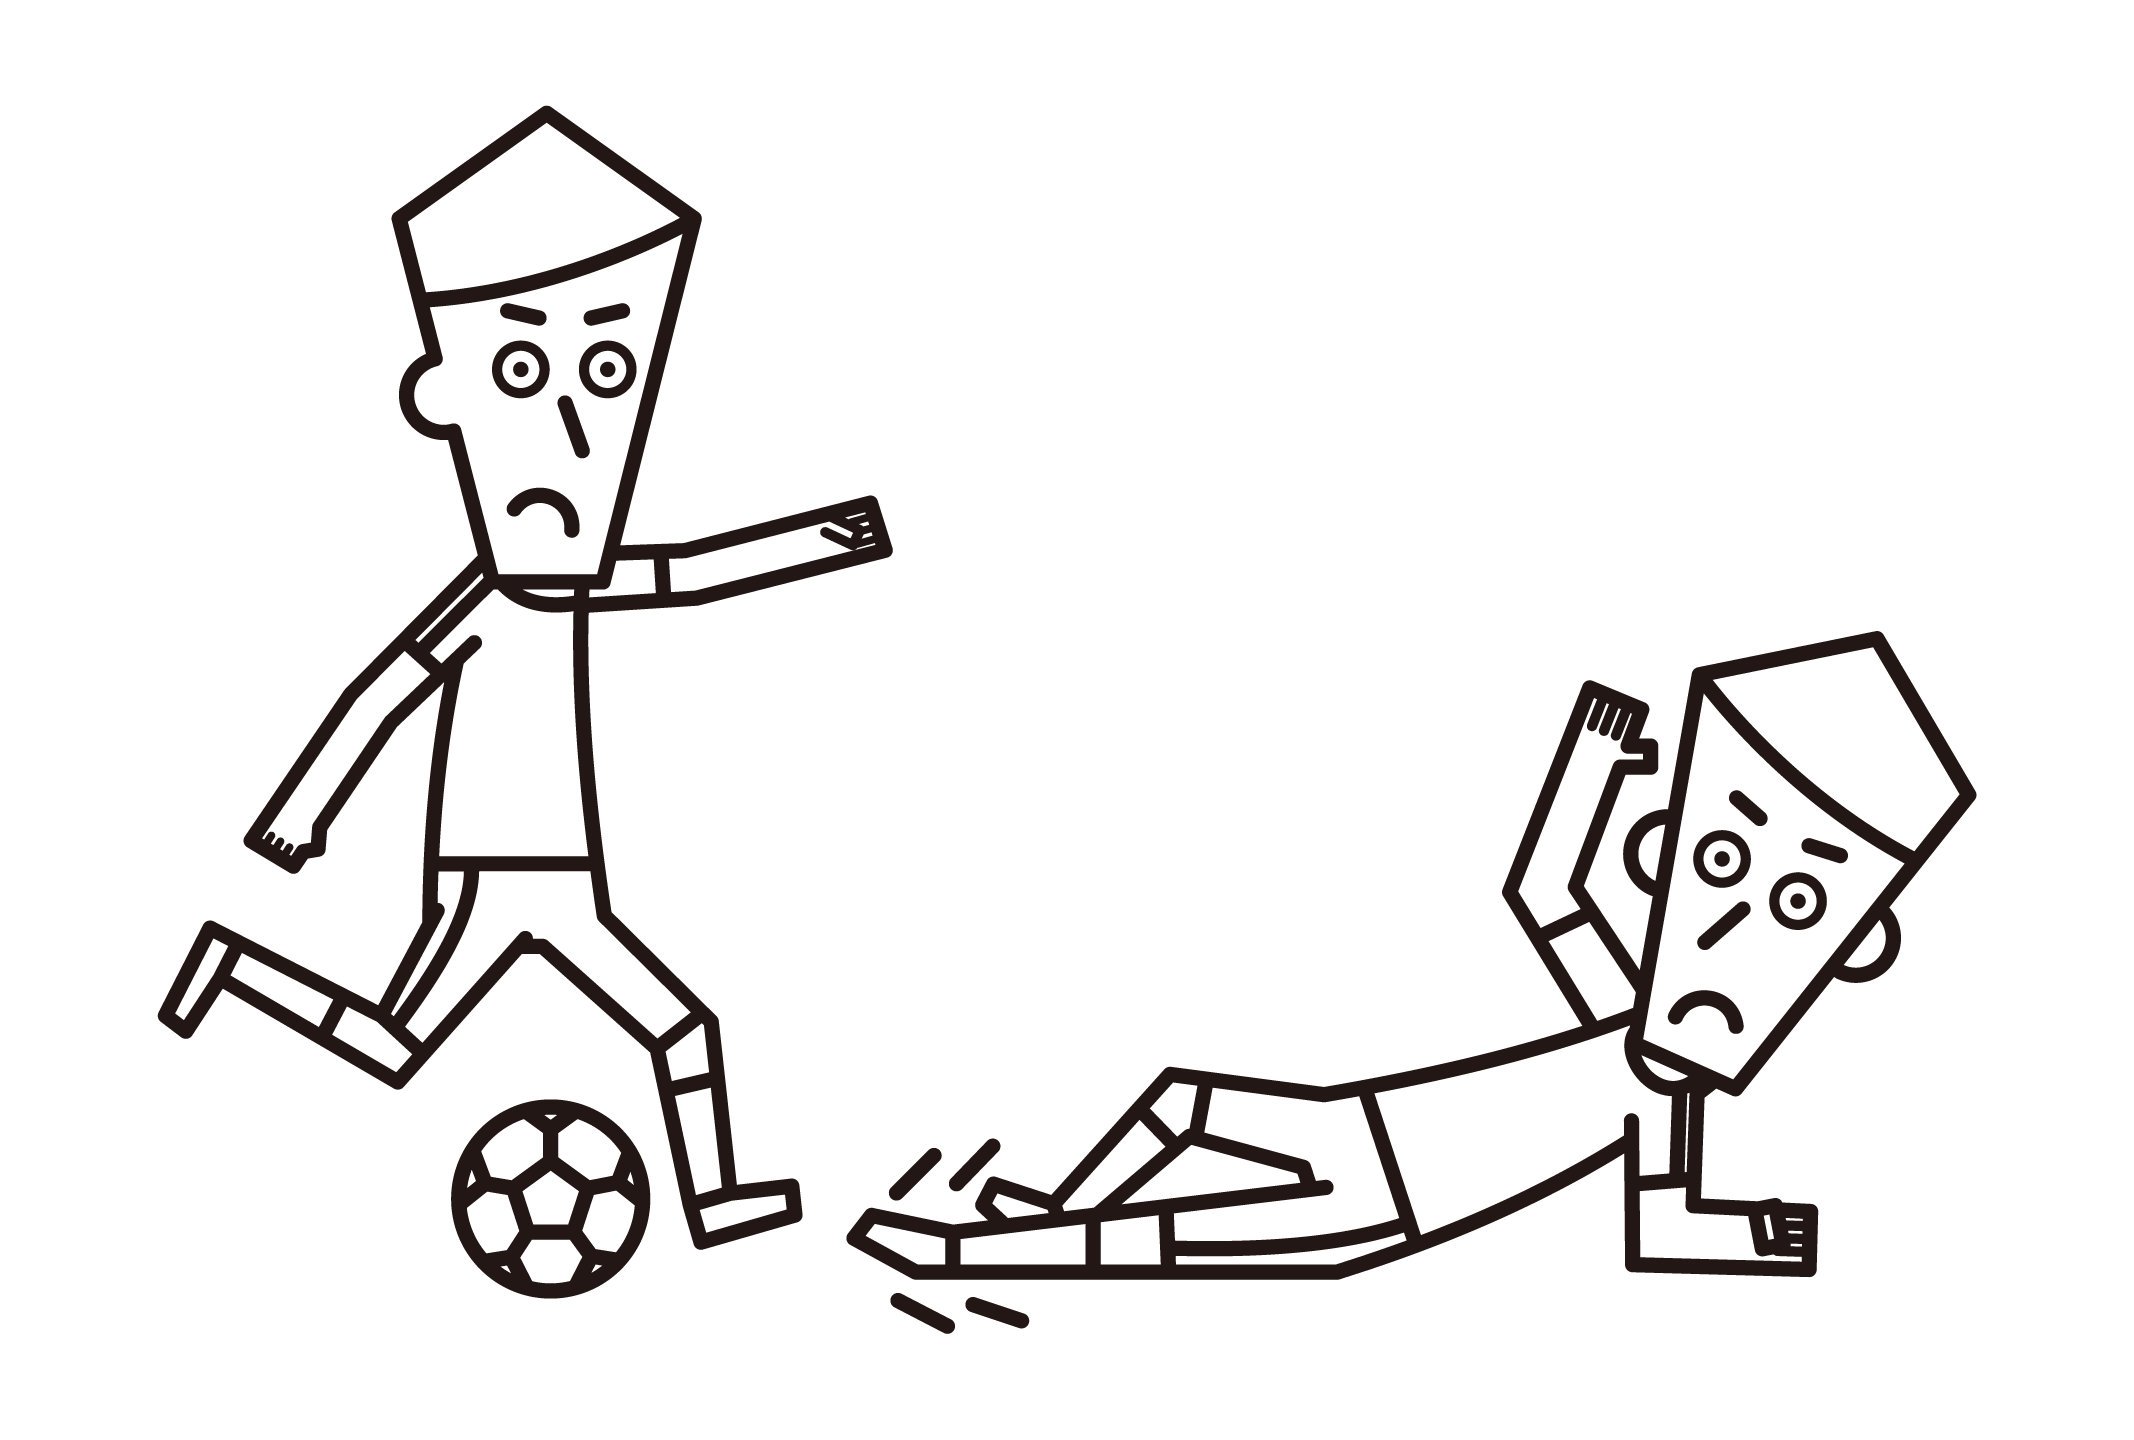 Illustration of soccer players (men) playing a game